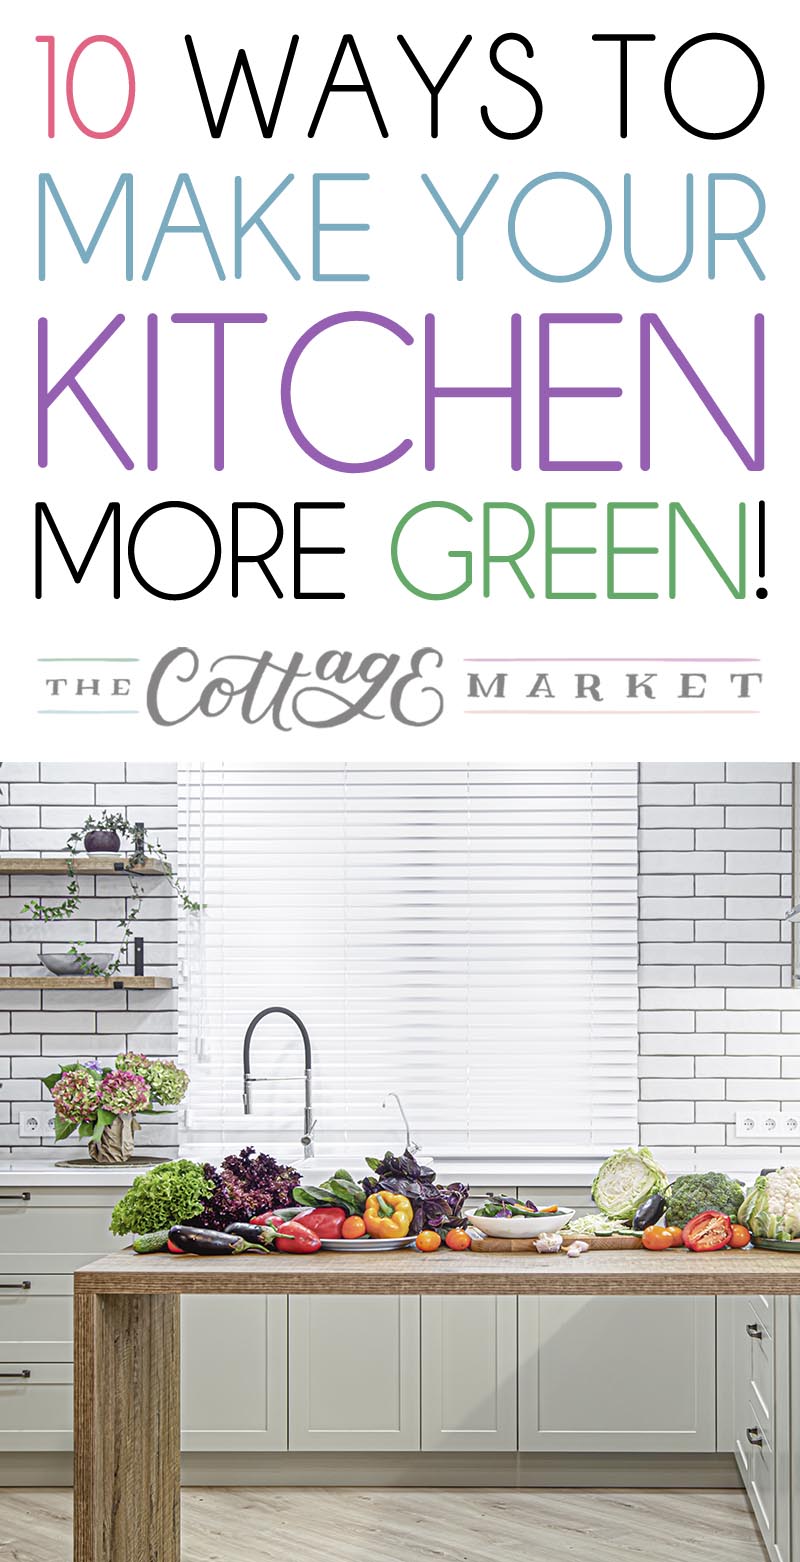 Come and Check Out These Easy 10 Ways To Make Your Kitchen More Green.  Simple steps that make a big difference for Mother Earth!